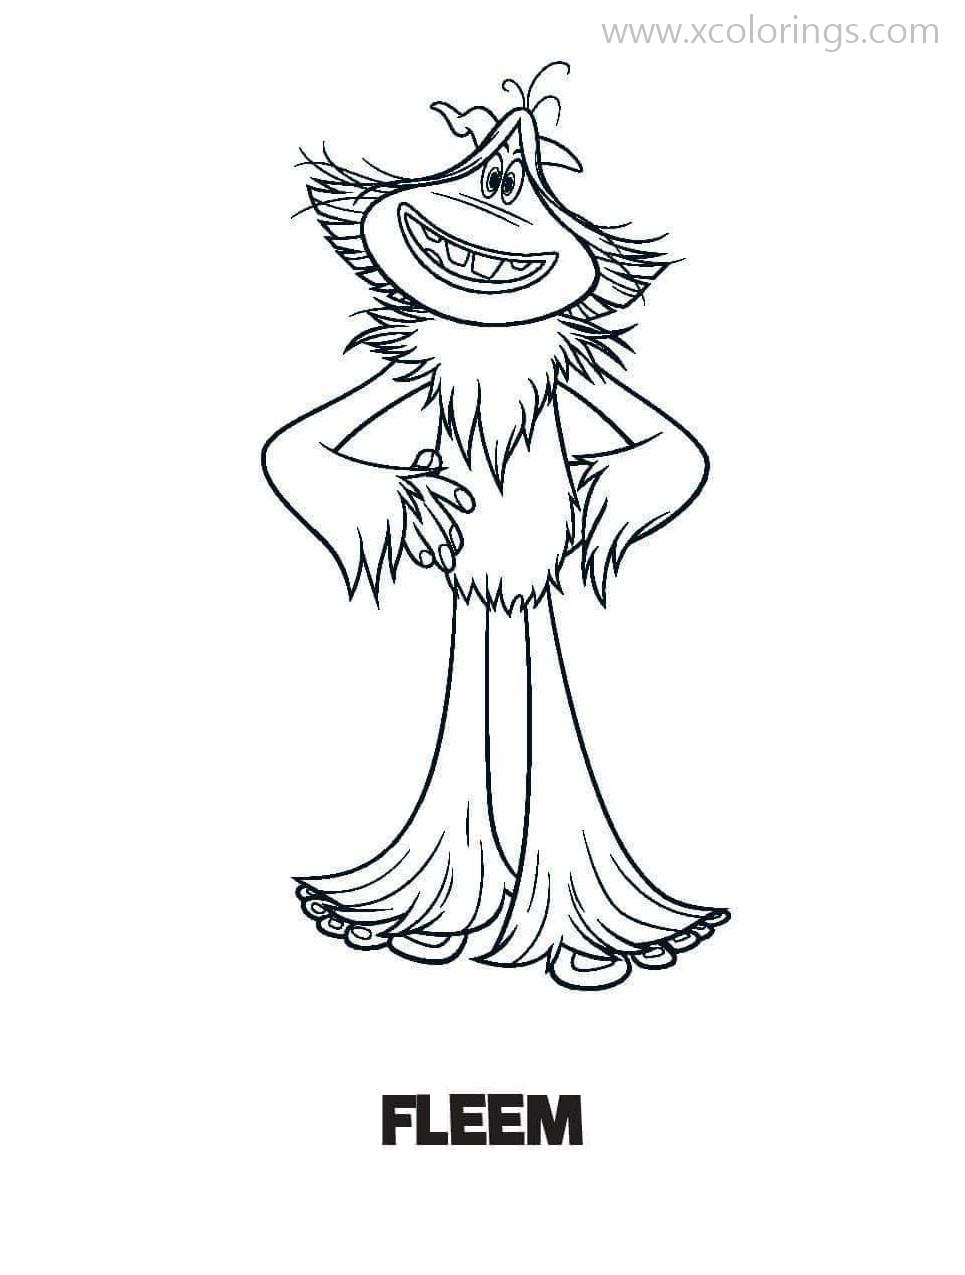 Free Smallfoot Coloring Pages Fleem printable